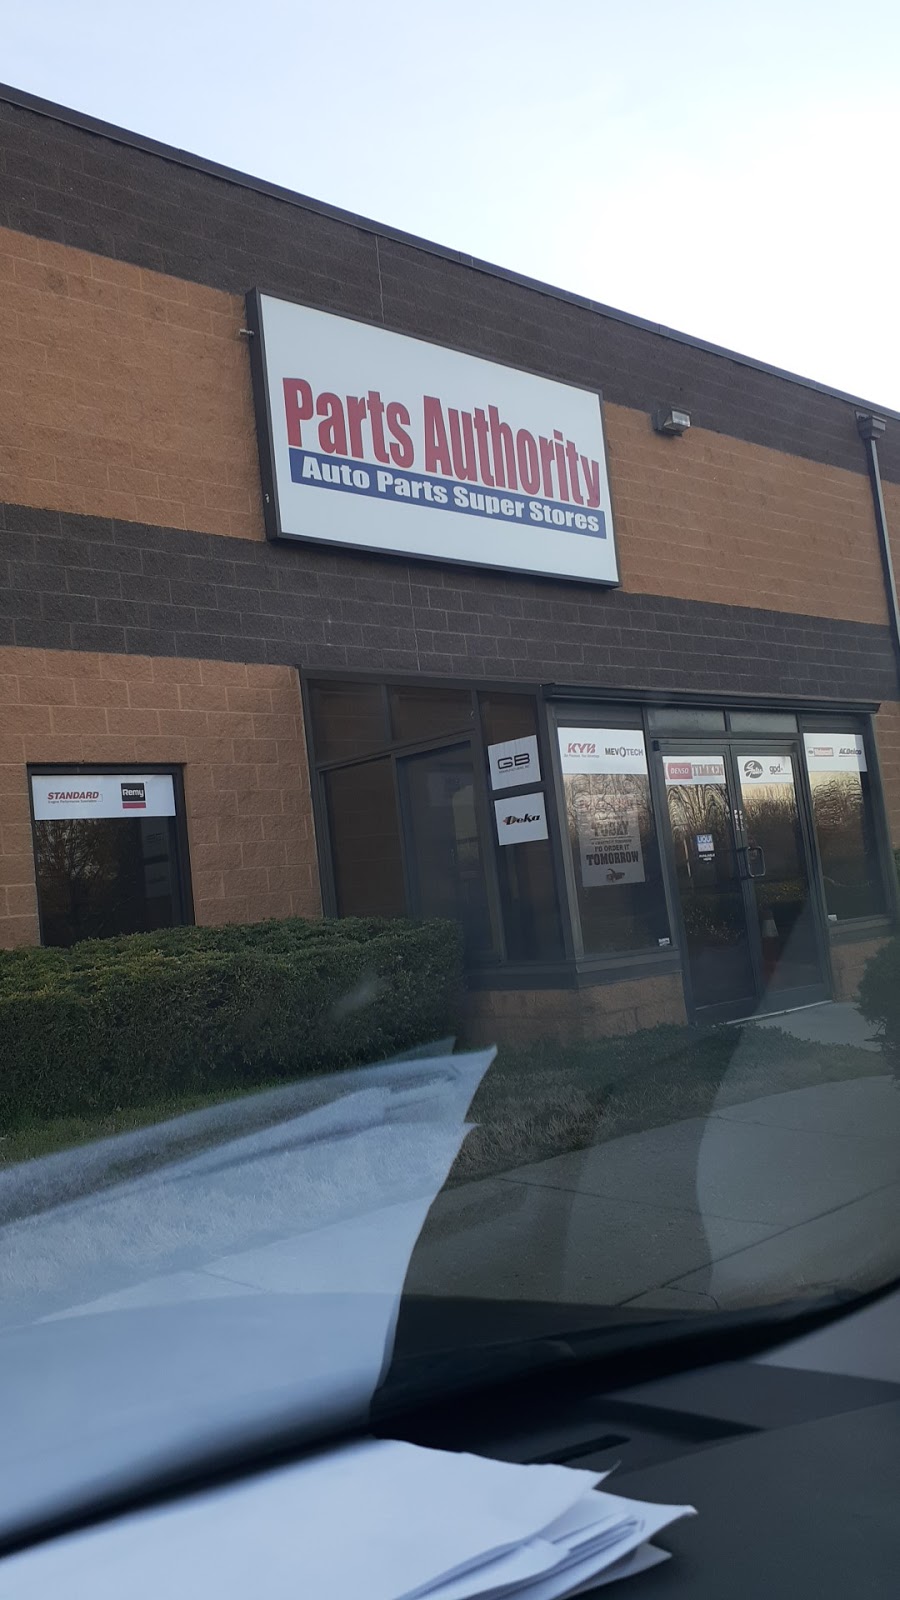 Parts Authority | 224 8th Ave NW, Glen Burnie, MD 21061 | Phone: (410) 691-3784